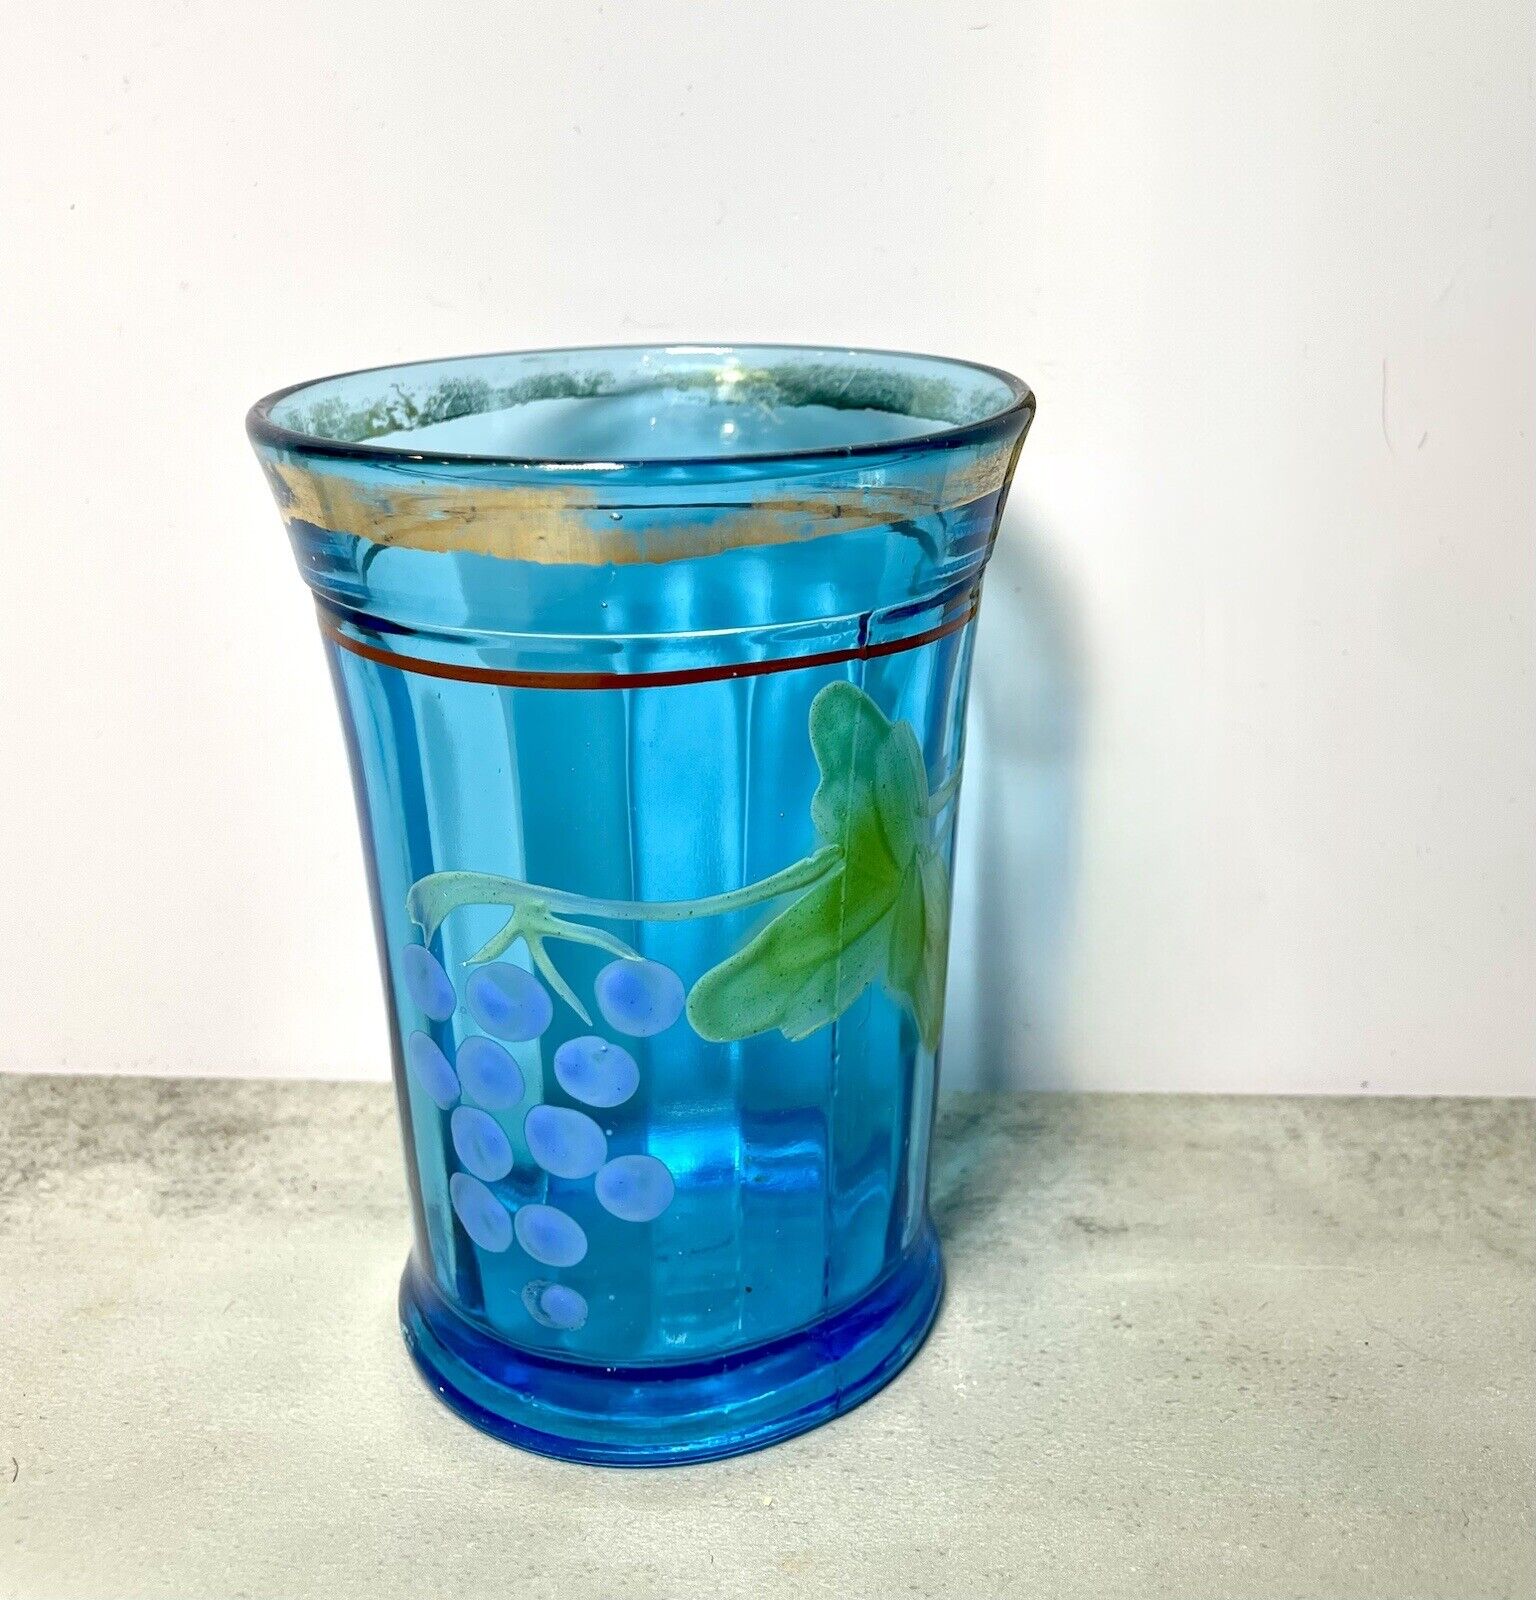 Antique NORTHWOOD Blue Glass Paneled Tumbler Hand-Painted Floral, Flared Top 5”